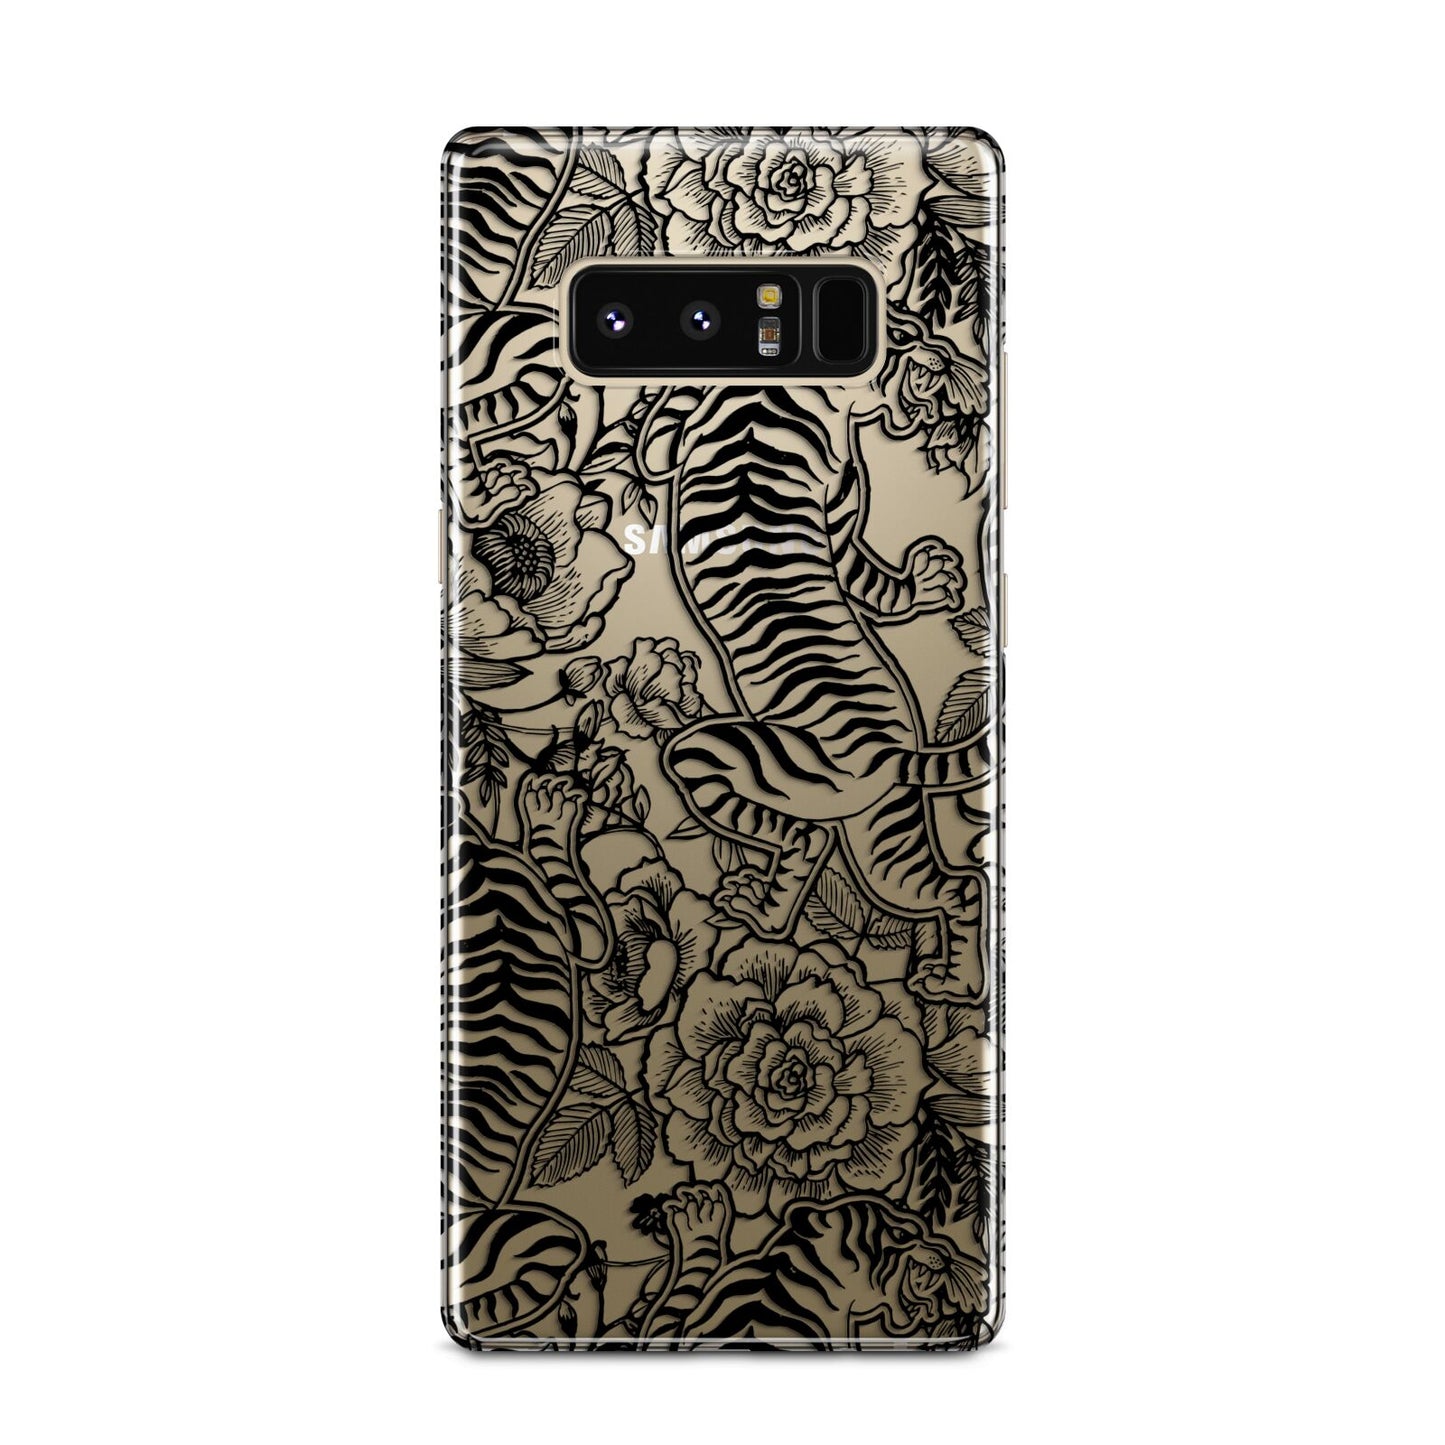 Chinese Tiger Samsung Galaxy Note 8 Case